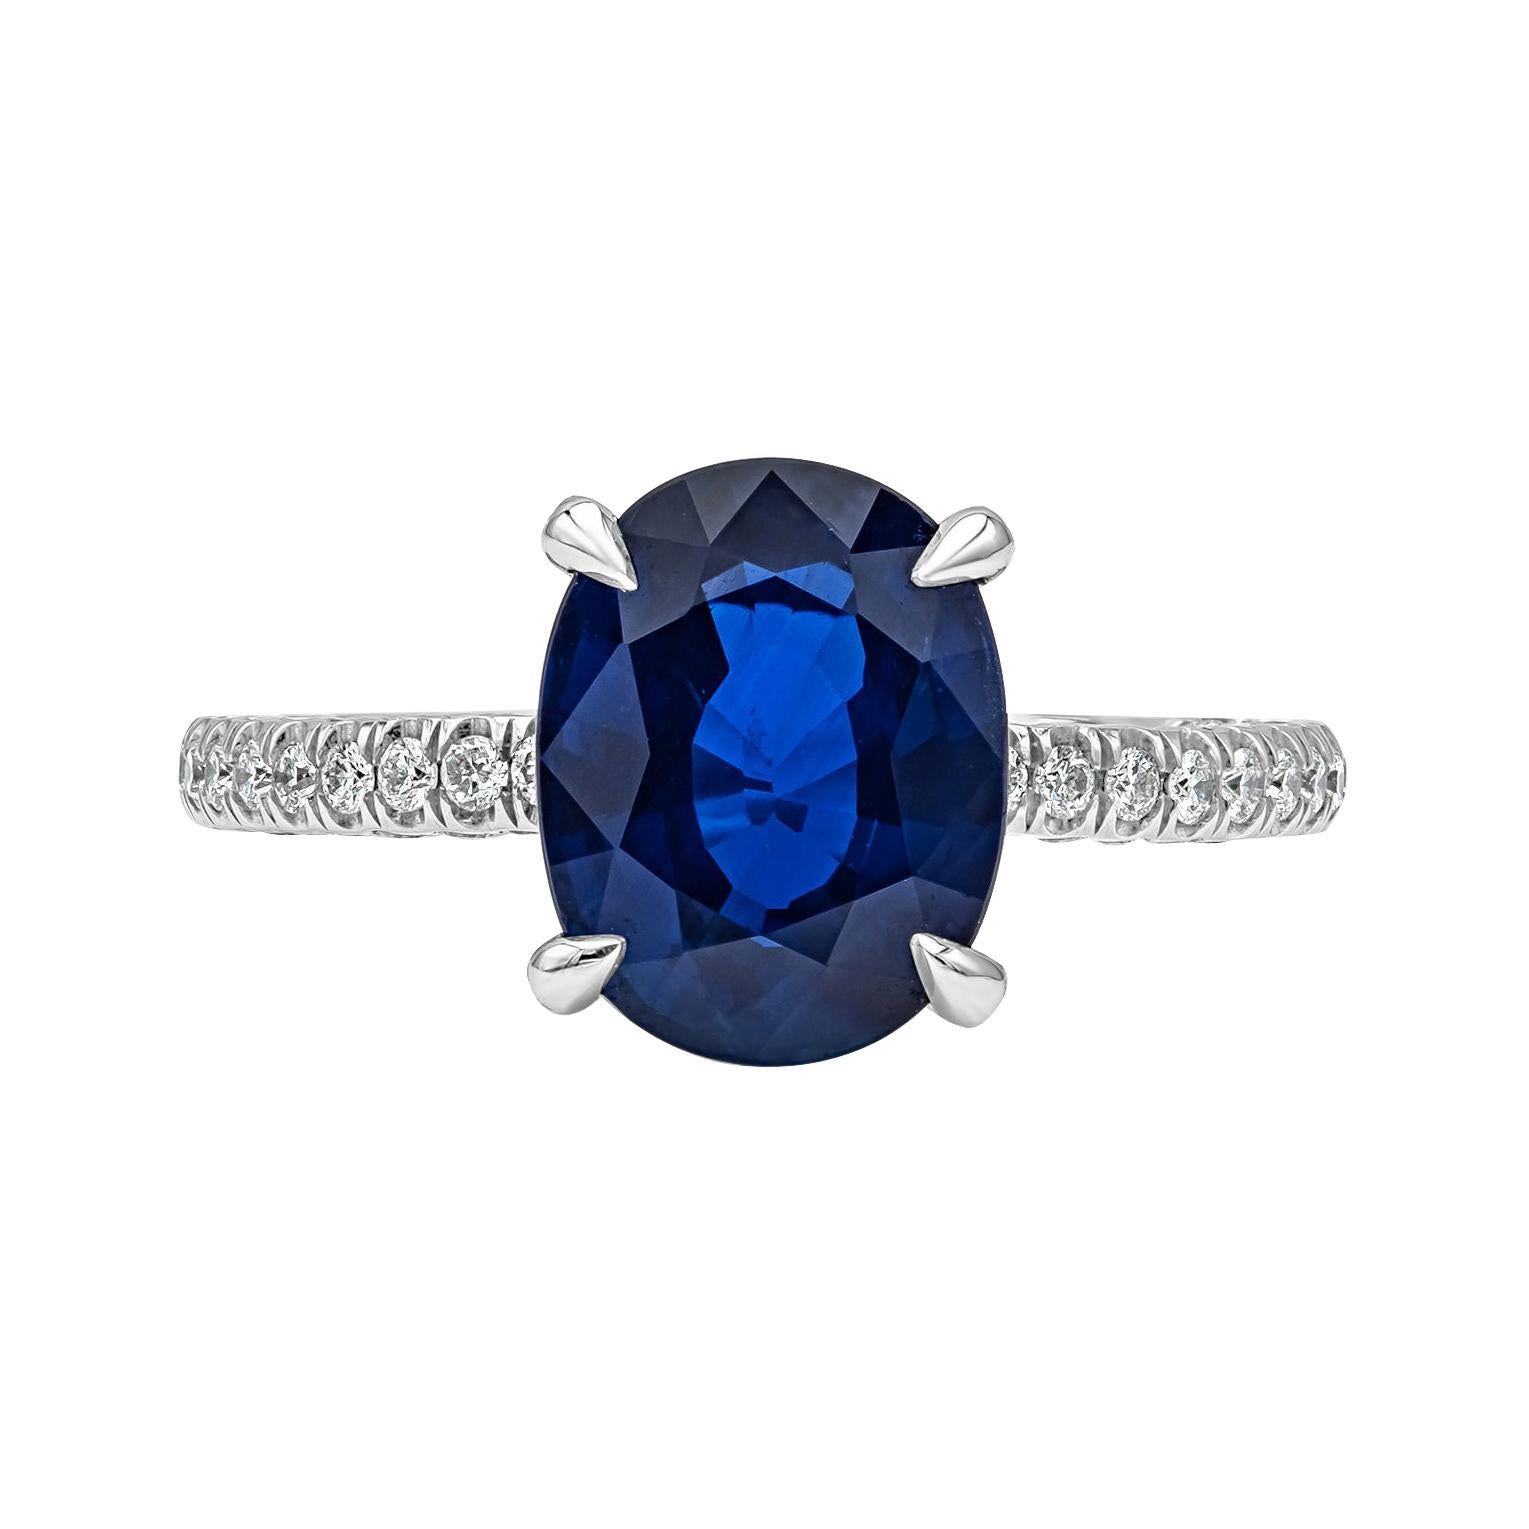 GIA Certified 3.84 carats Natural Blue Sapphire Engagement Ring with Side Stones